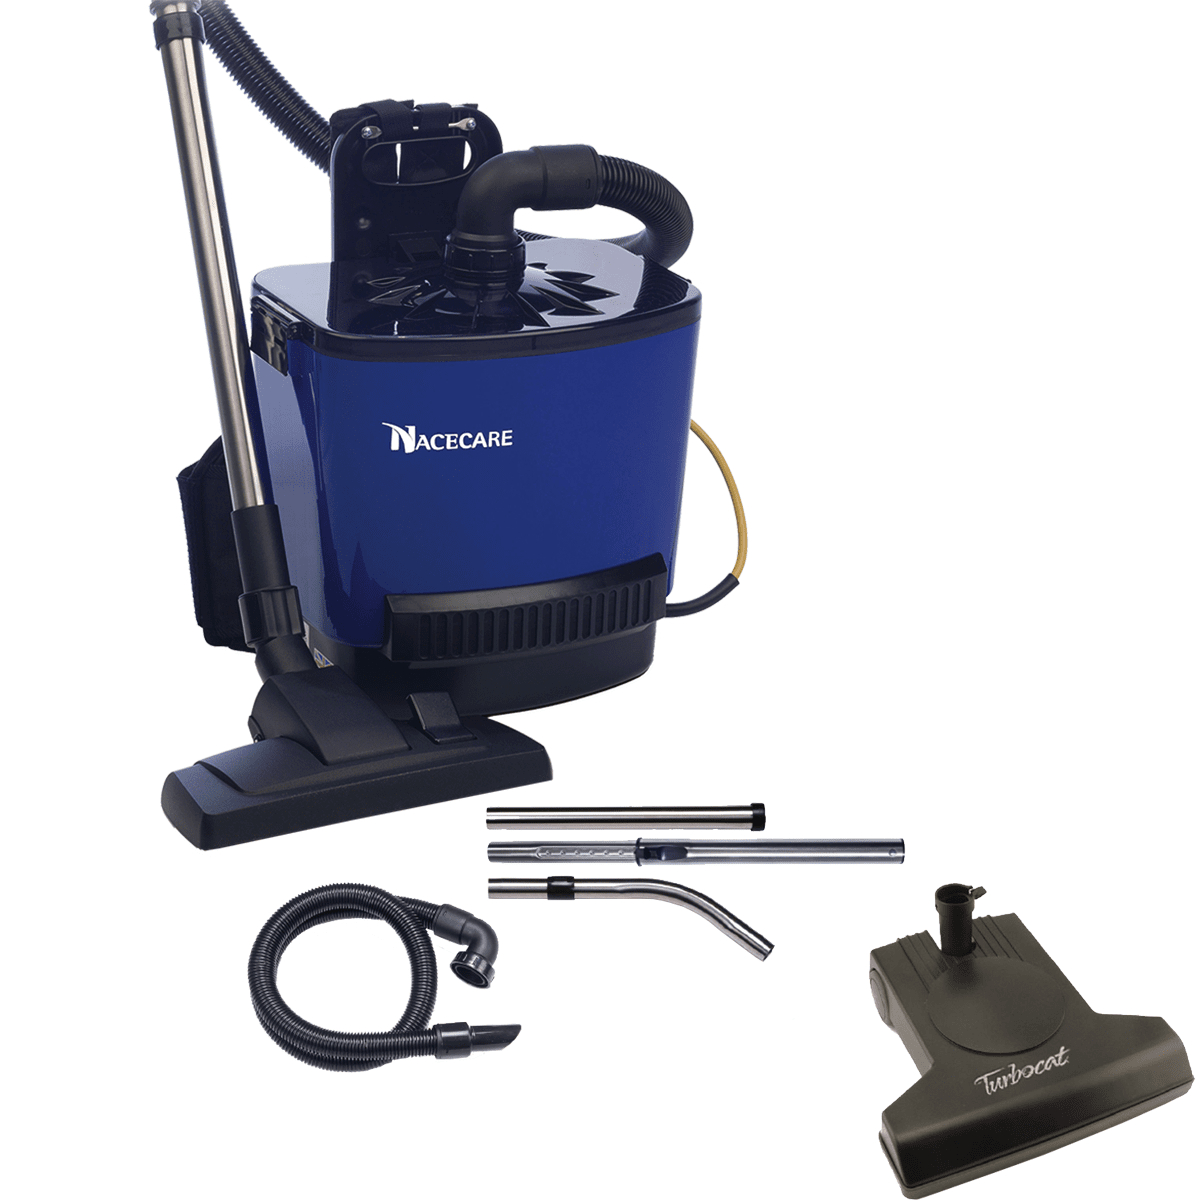 Nacecare Rsv 130 Backpack Vacuum With Air Driven Power Head Kit - Astb3